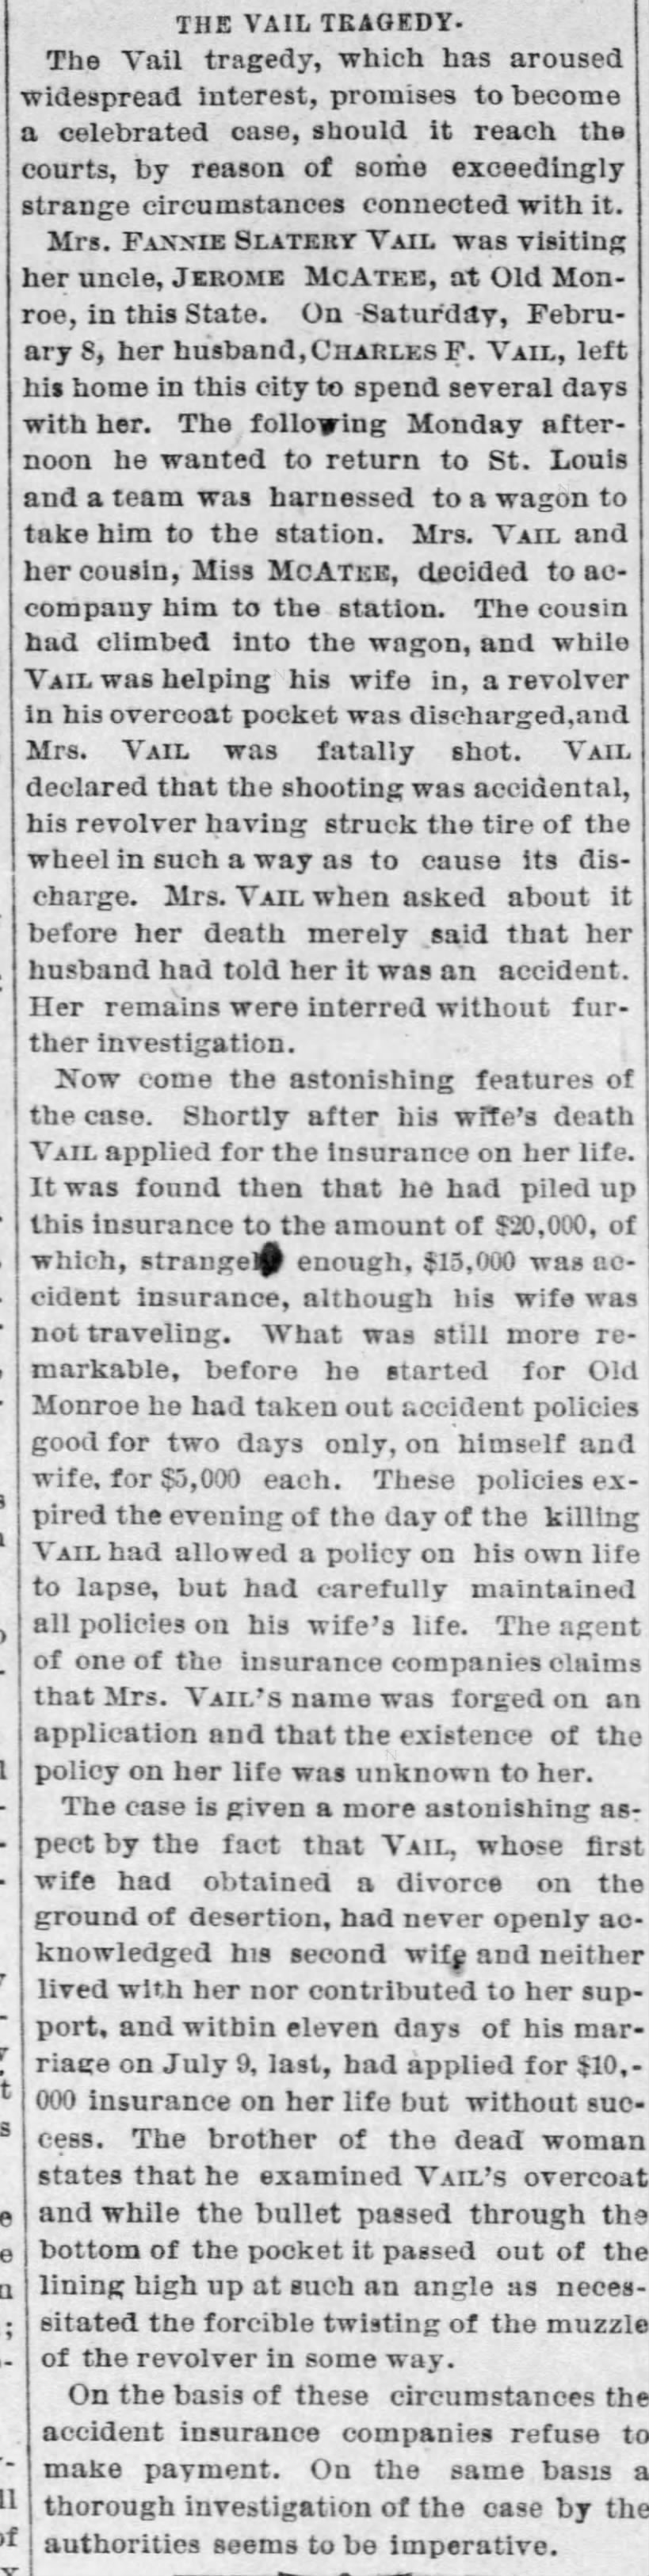 Feb 19, 1890
The vail tragedy